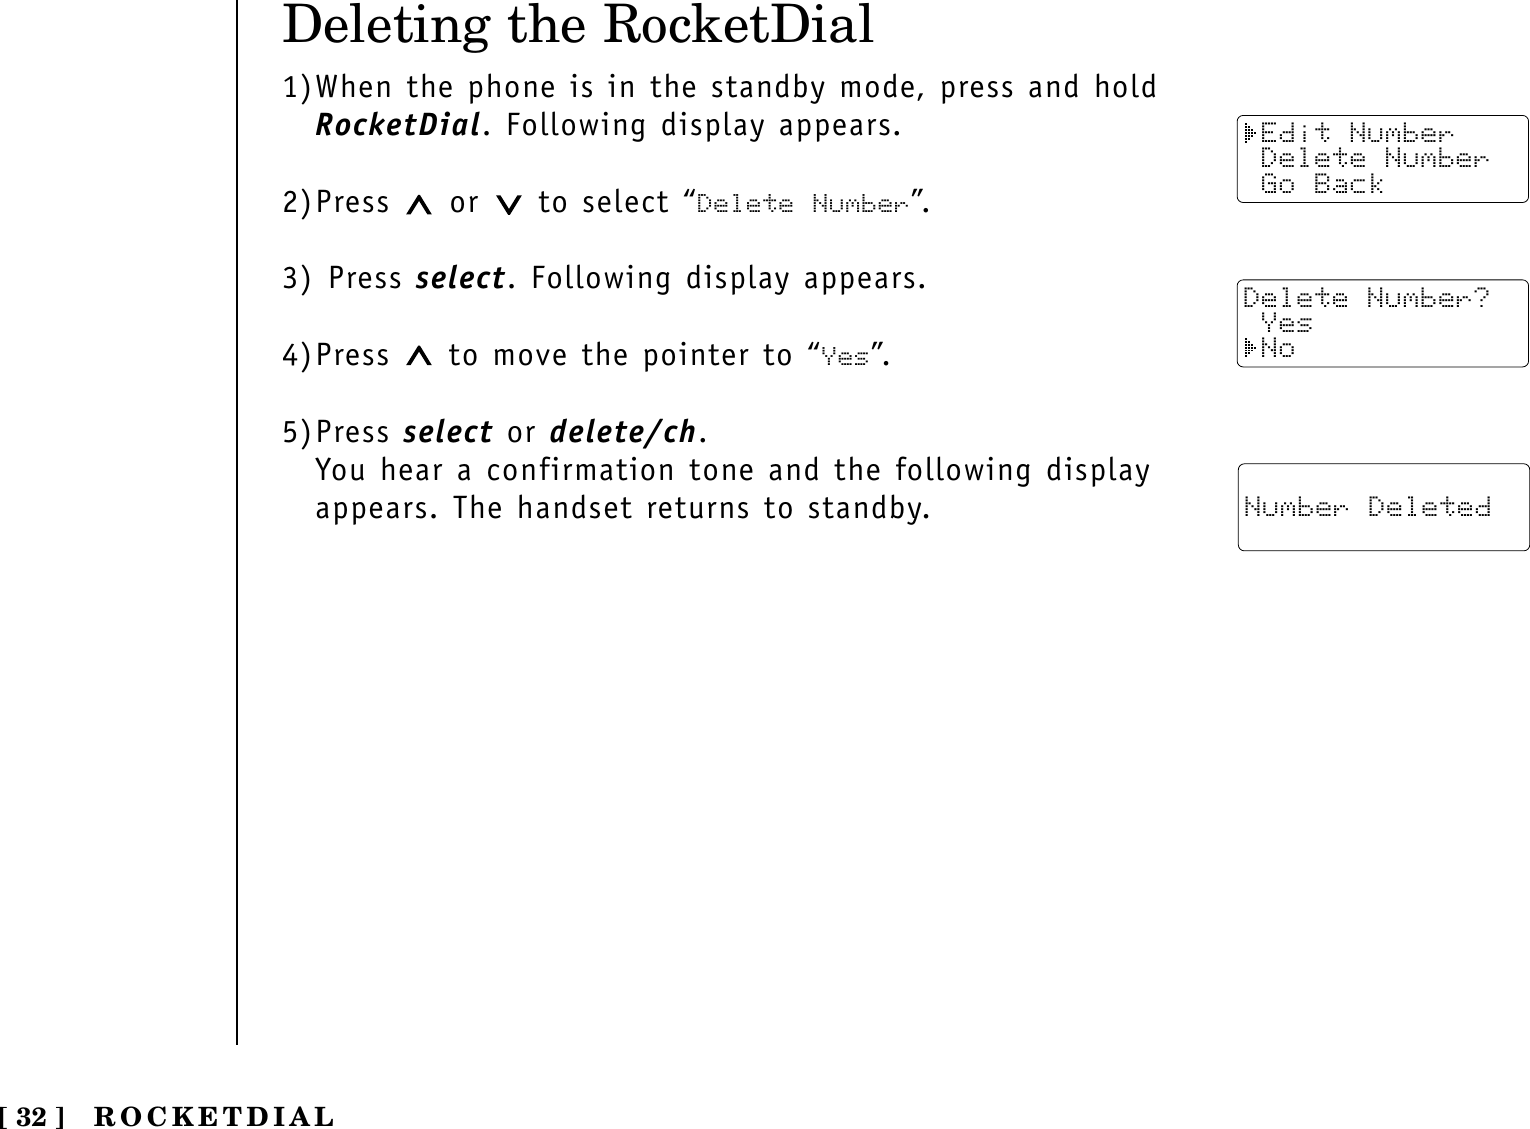 Deleting the RocketDial1)When the phone is in the standby mode, press and holdRocketDial. Following display appears.2)Press  or  to select “Delete Number”.3) Press select. Following display appears.4)Press  to move the pointer to “Yes”.5)Press select or delete/ch.You hear a confirmation tone and the following displayappears. The handset returns to standby.ROCKETDIAL[ 32 ] Edit Number Delete Number Go BackDelete Number? Yes No Number Deleted